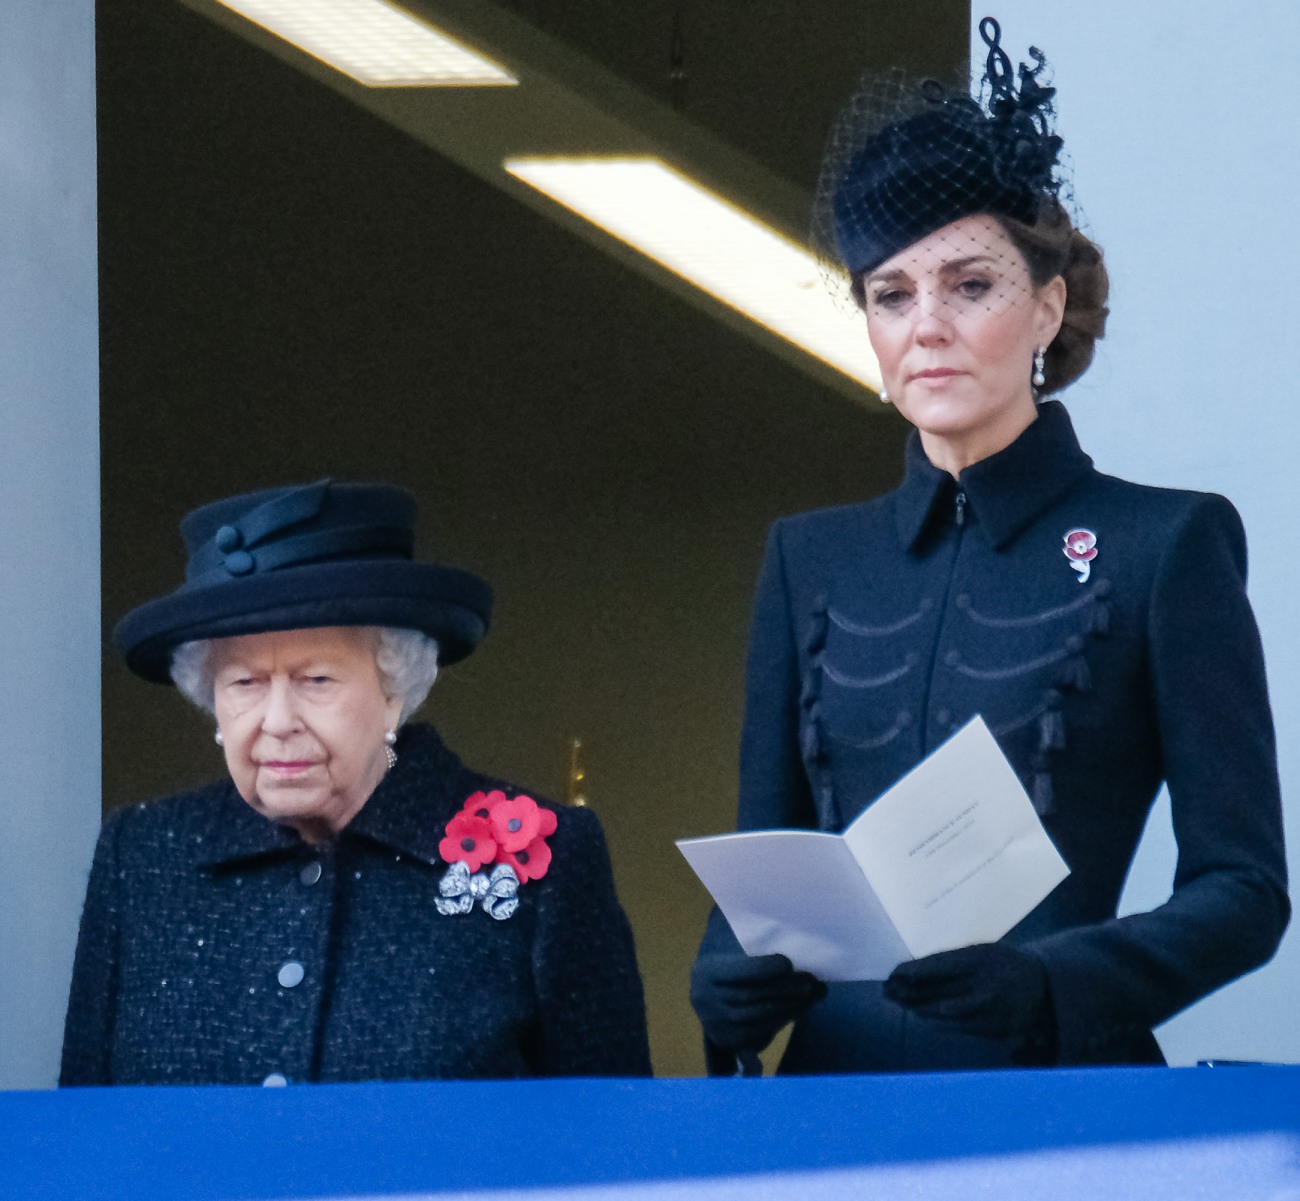 Her Majesty The Queen, HRH The Duchess of Cornwall and HRH The Duchess of Cambridge attends the National Service of Remembrance at the Cenotaph on Sunday 10 November 2019